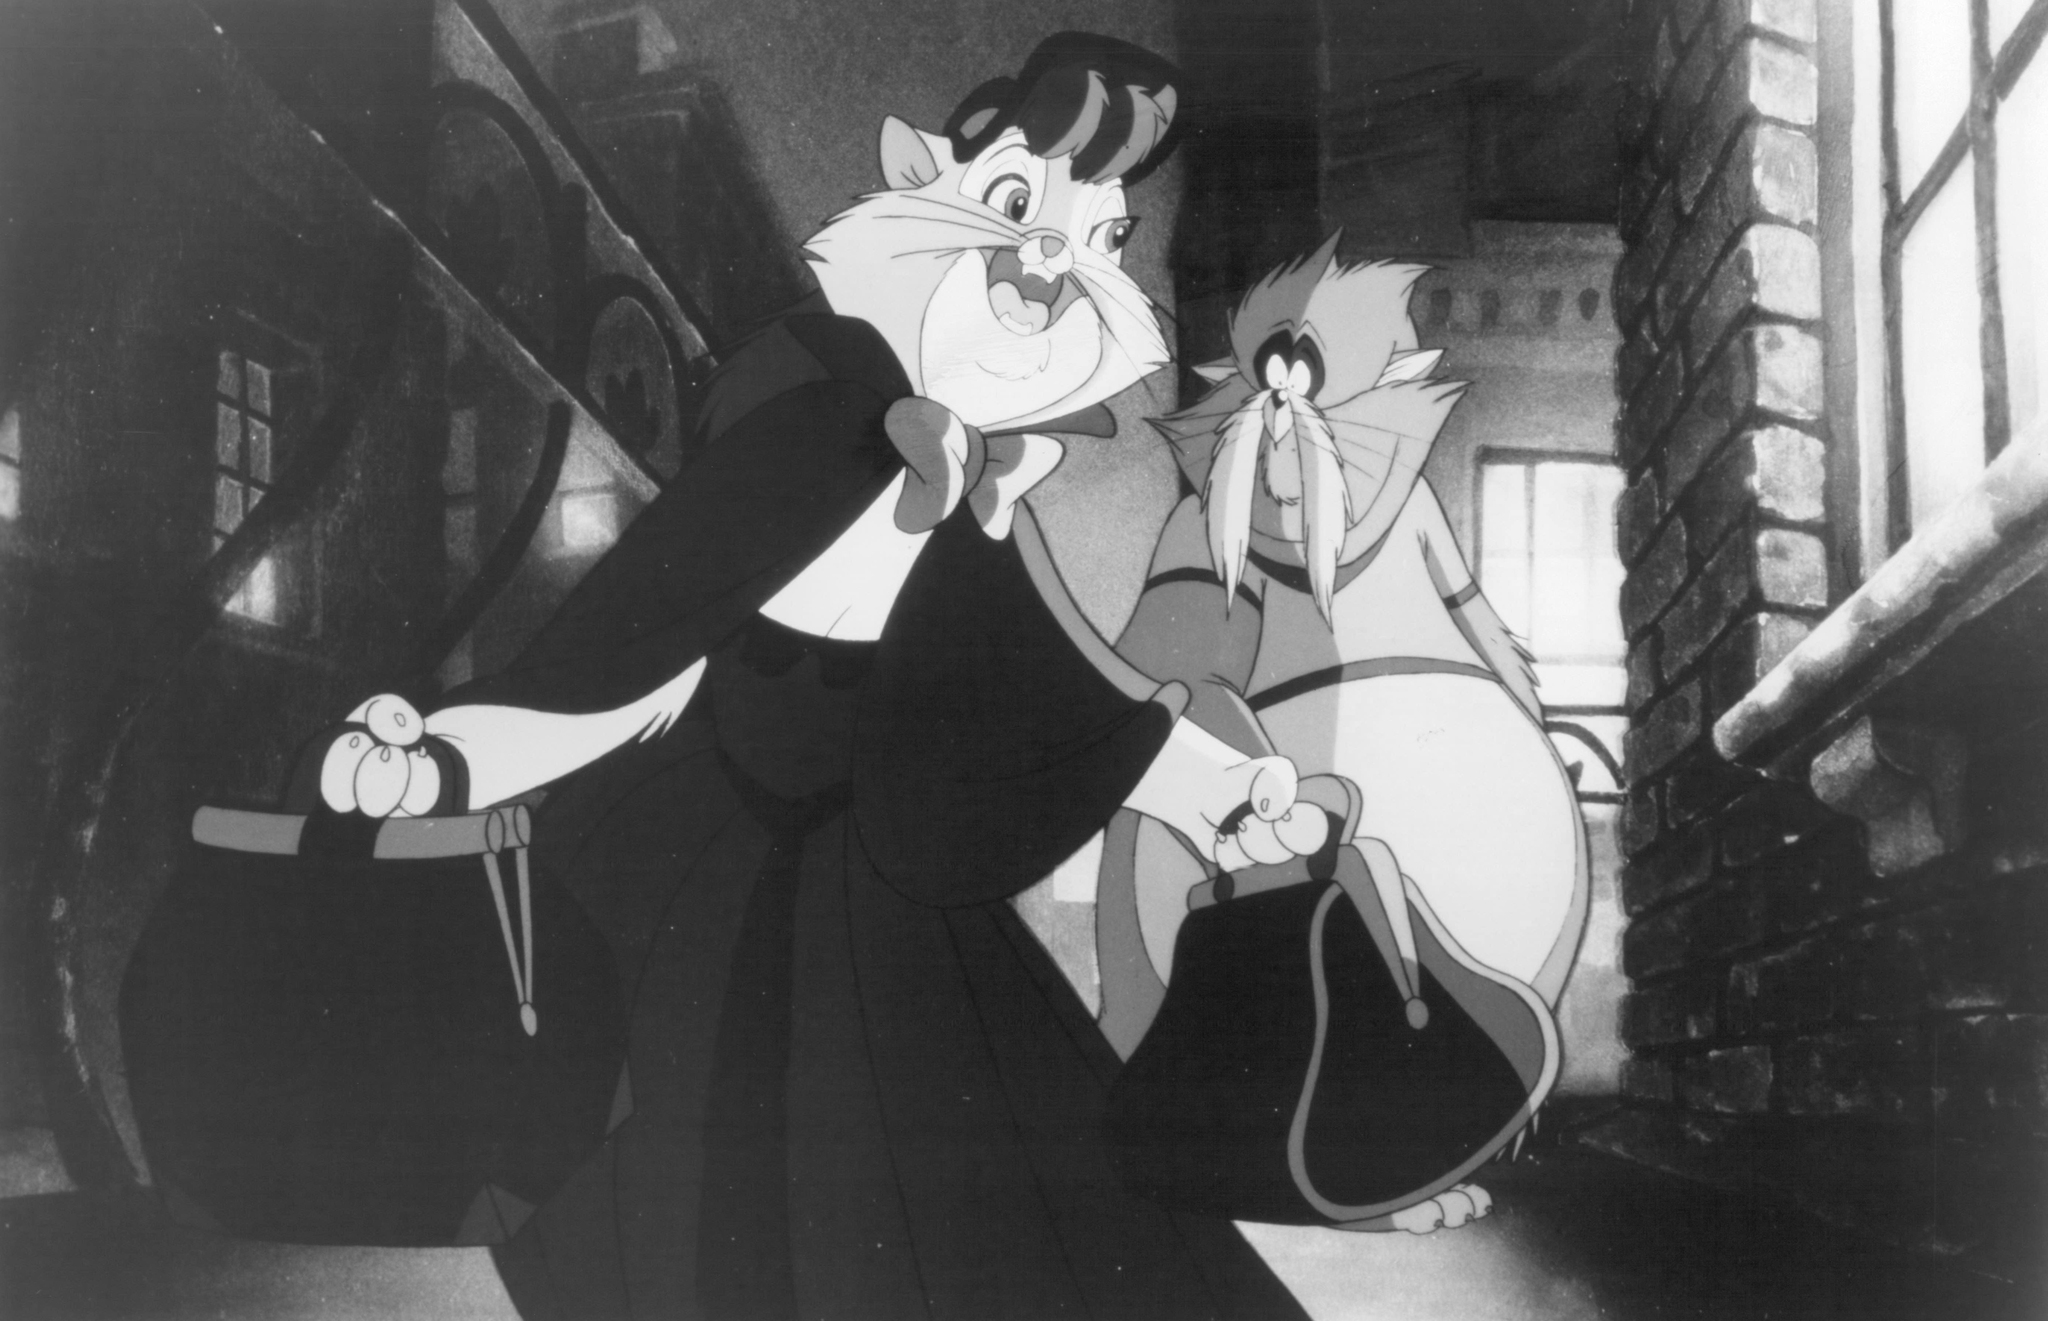 Still of John Cleese, Cathy Cavadini, Nehemiah Persoff and Erica Yohn in An American Tail: Fievel Goes West (1991)